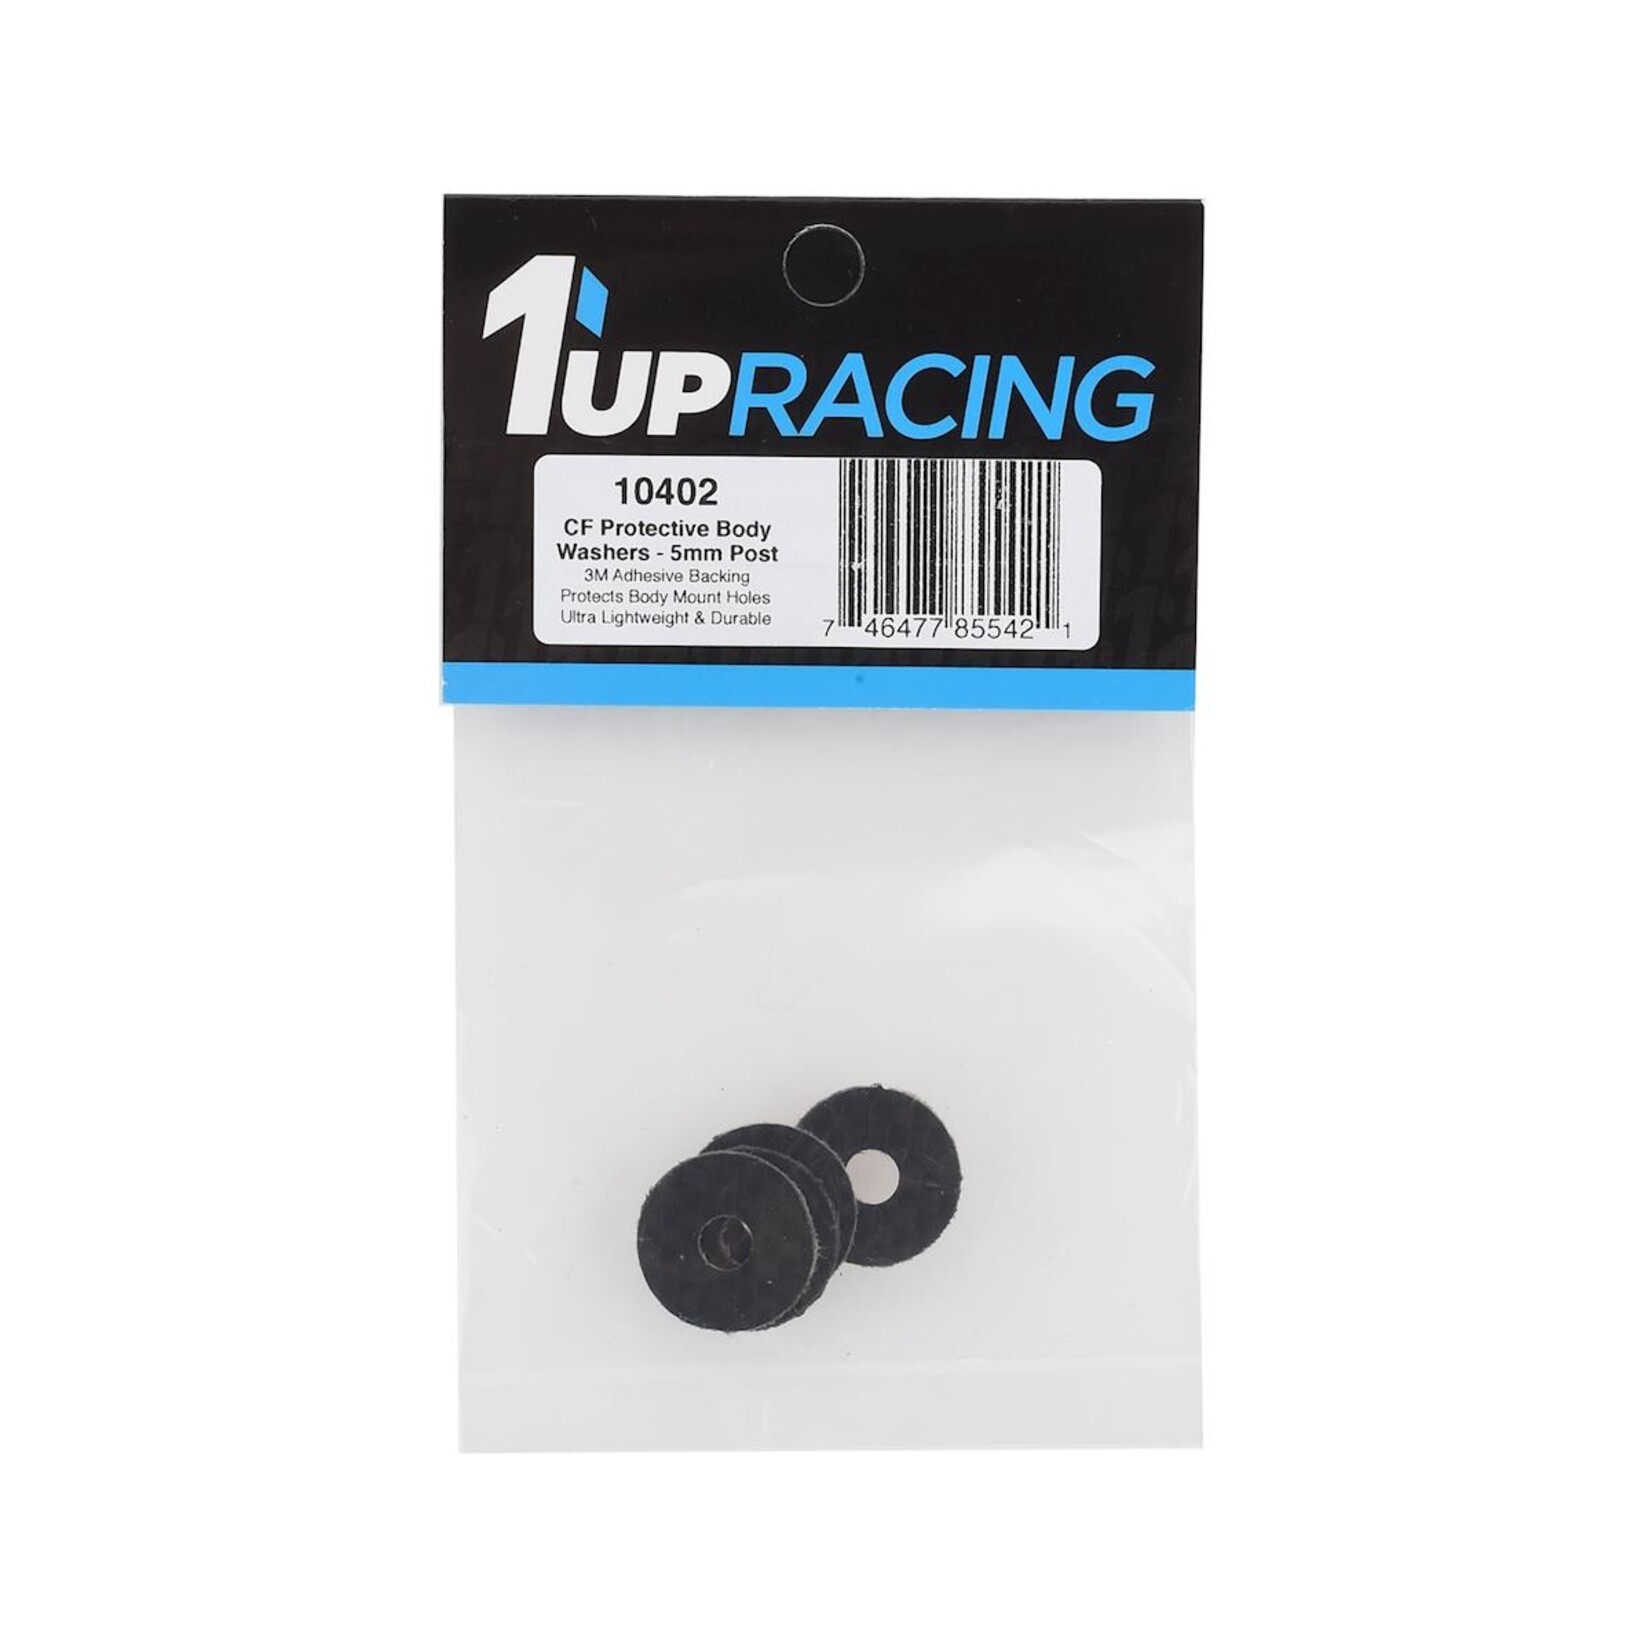 1UP Racing 1UP Racing 5mm Carbon Fiber Body Washers (4) # 1UP10402